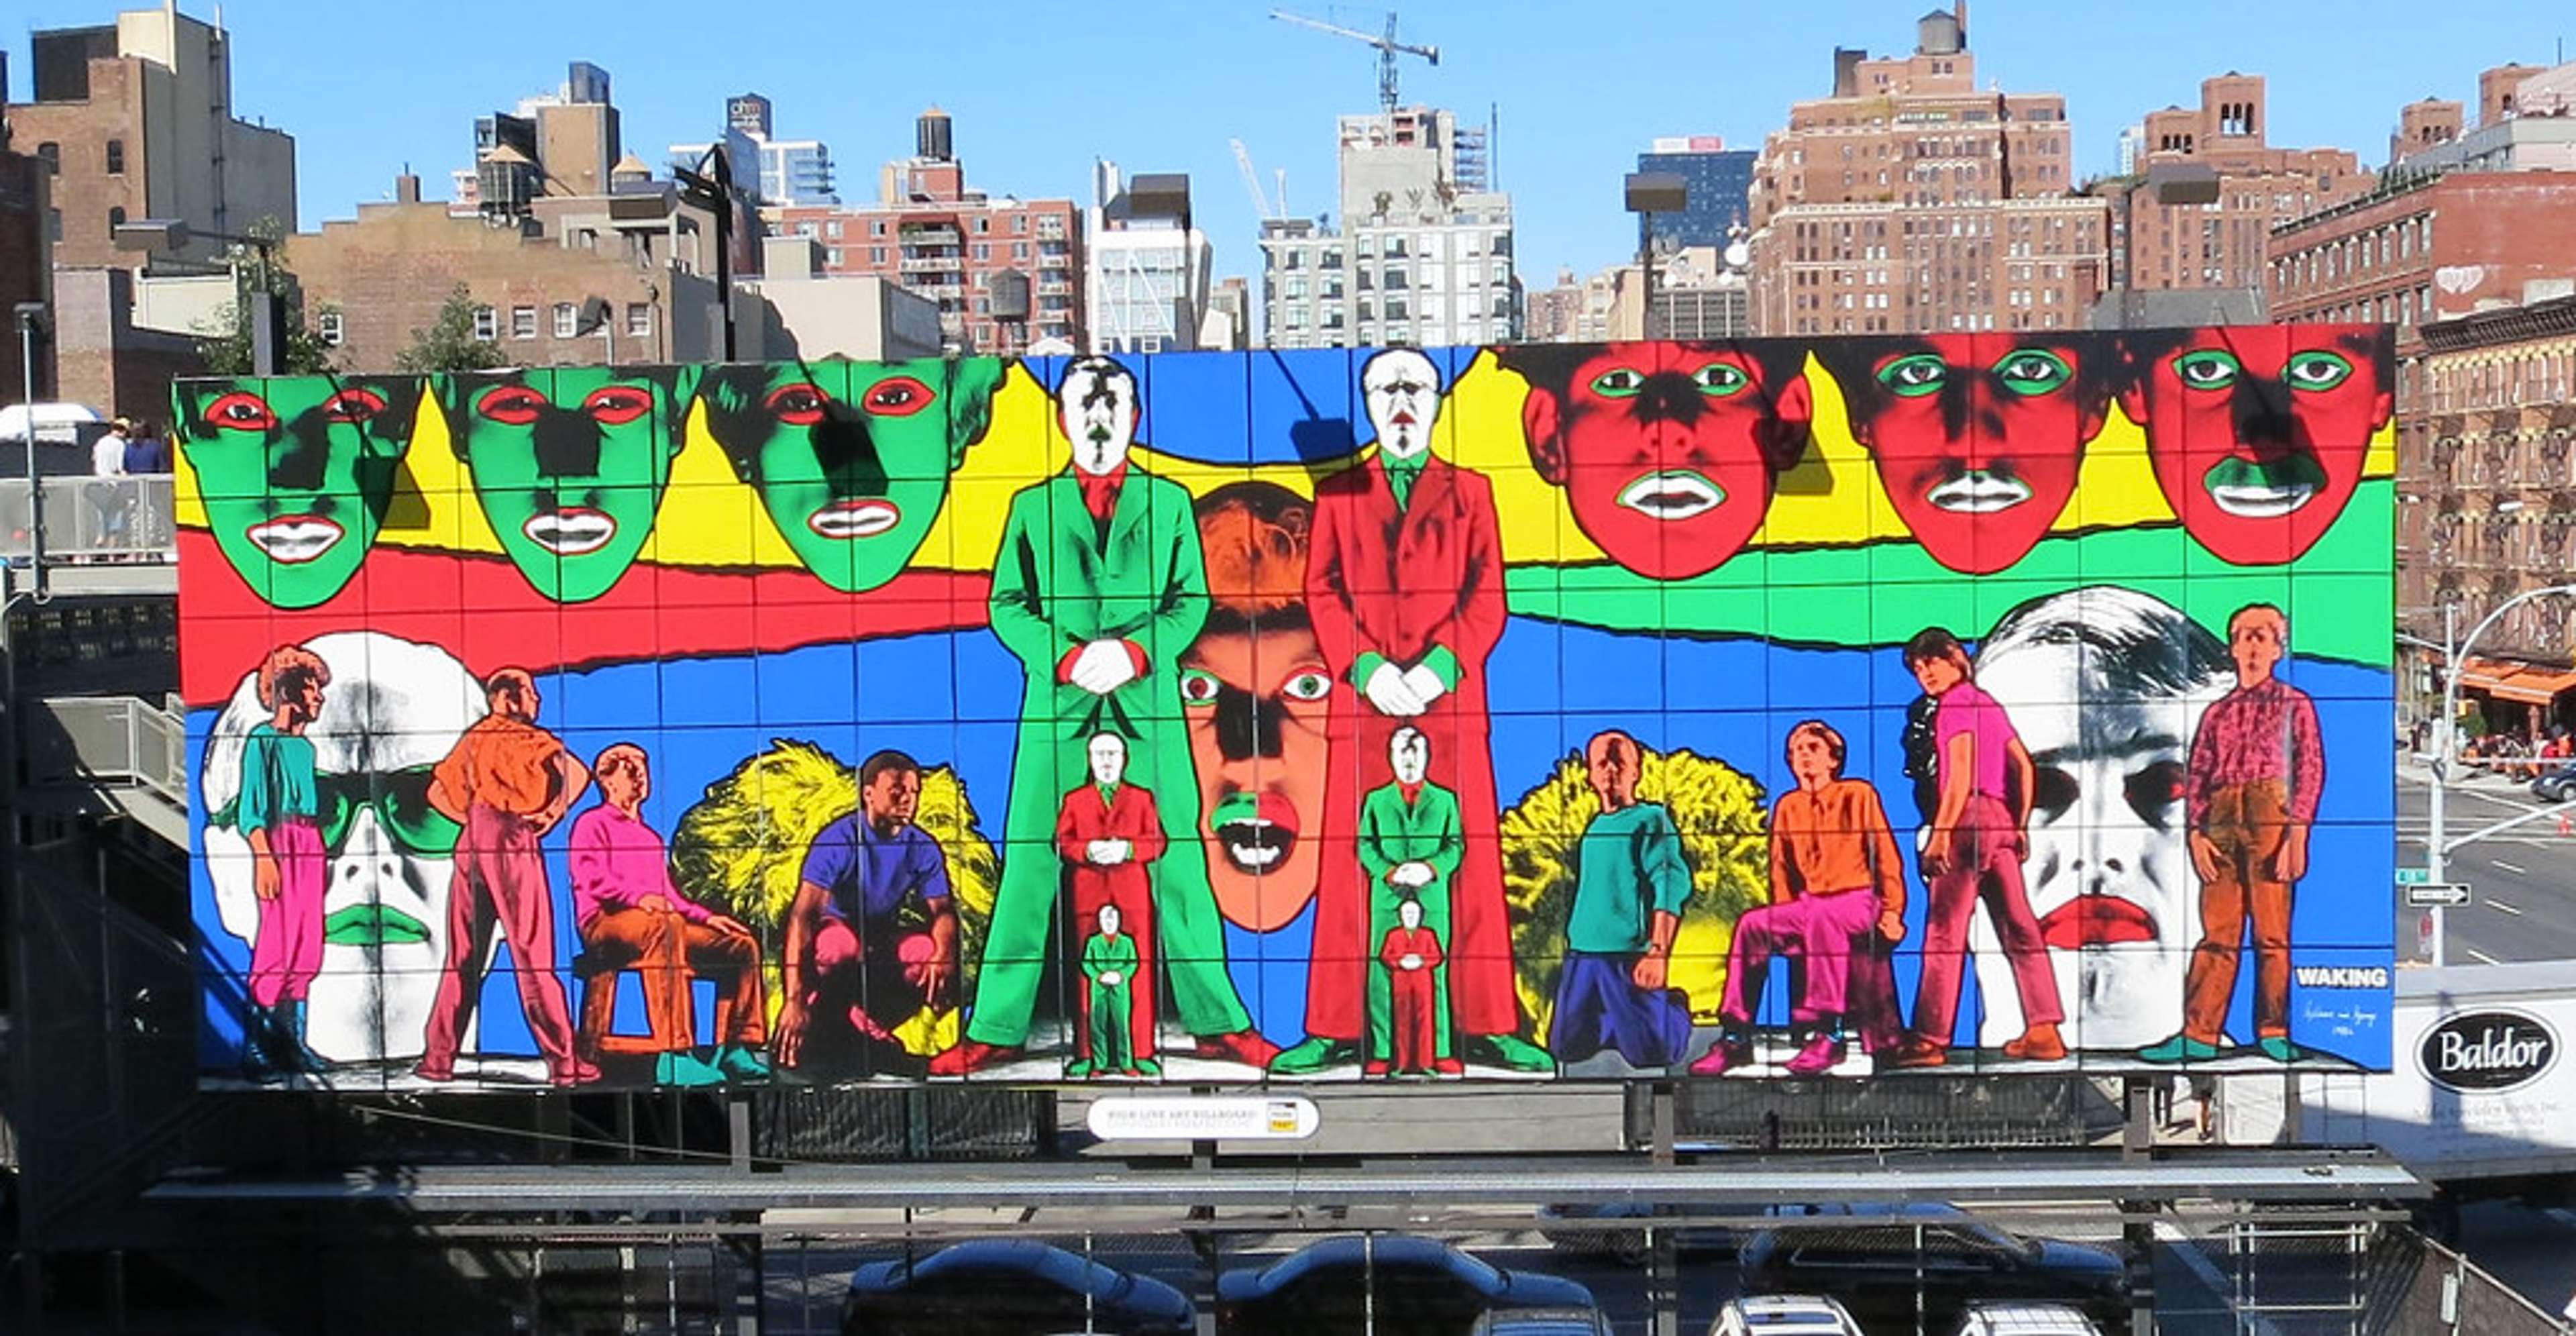 A large-scale, colourful mural by the artists Gilbert and George in New York City. It shows several renditions of the artist's faces in several sizes and colours.